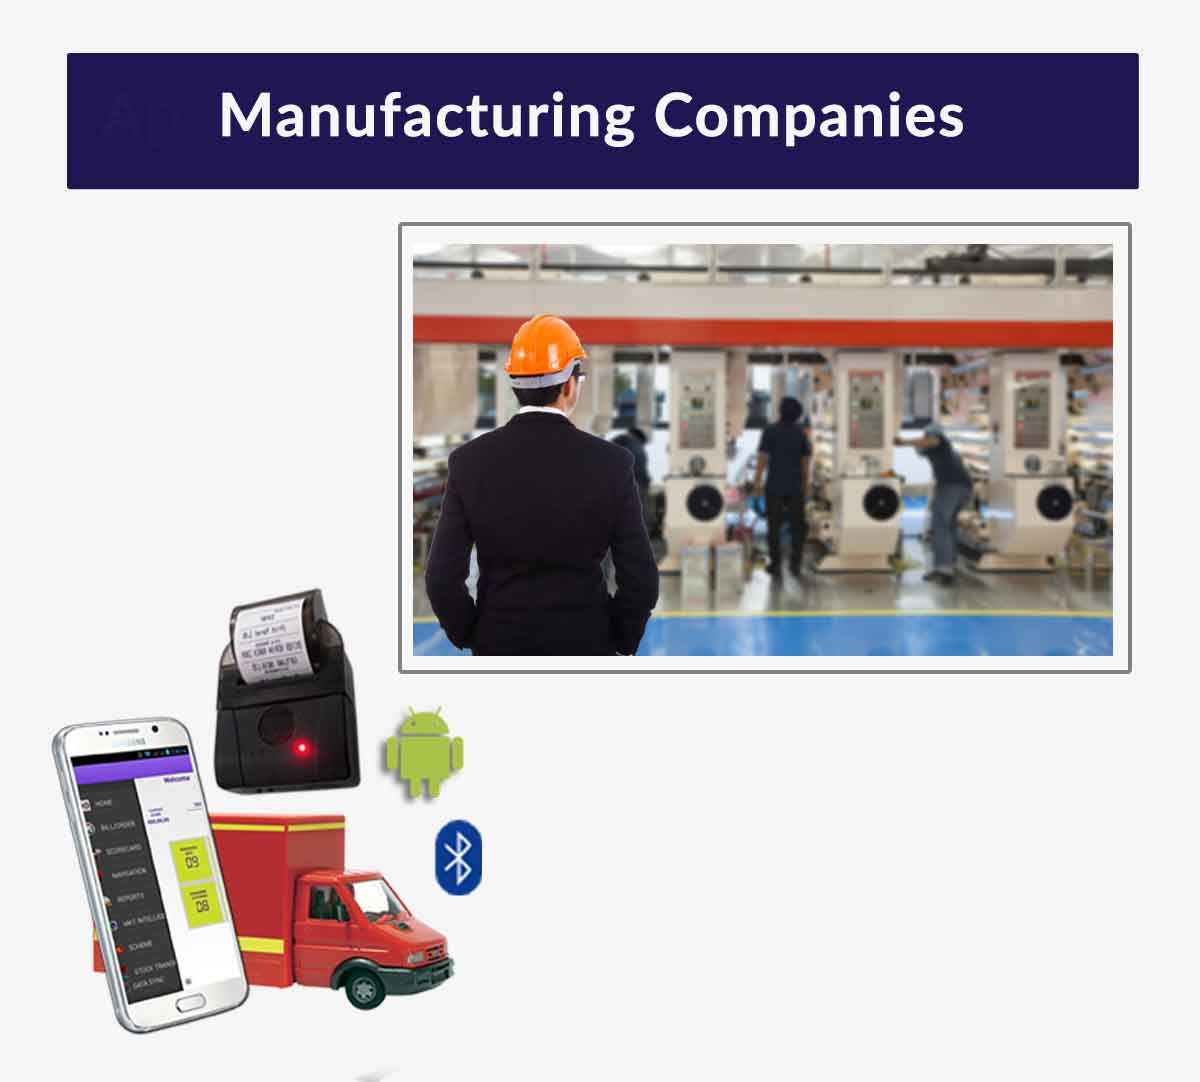 Manufacturing Companies